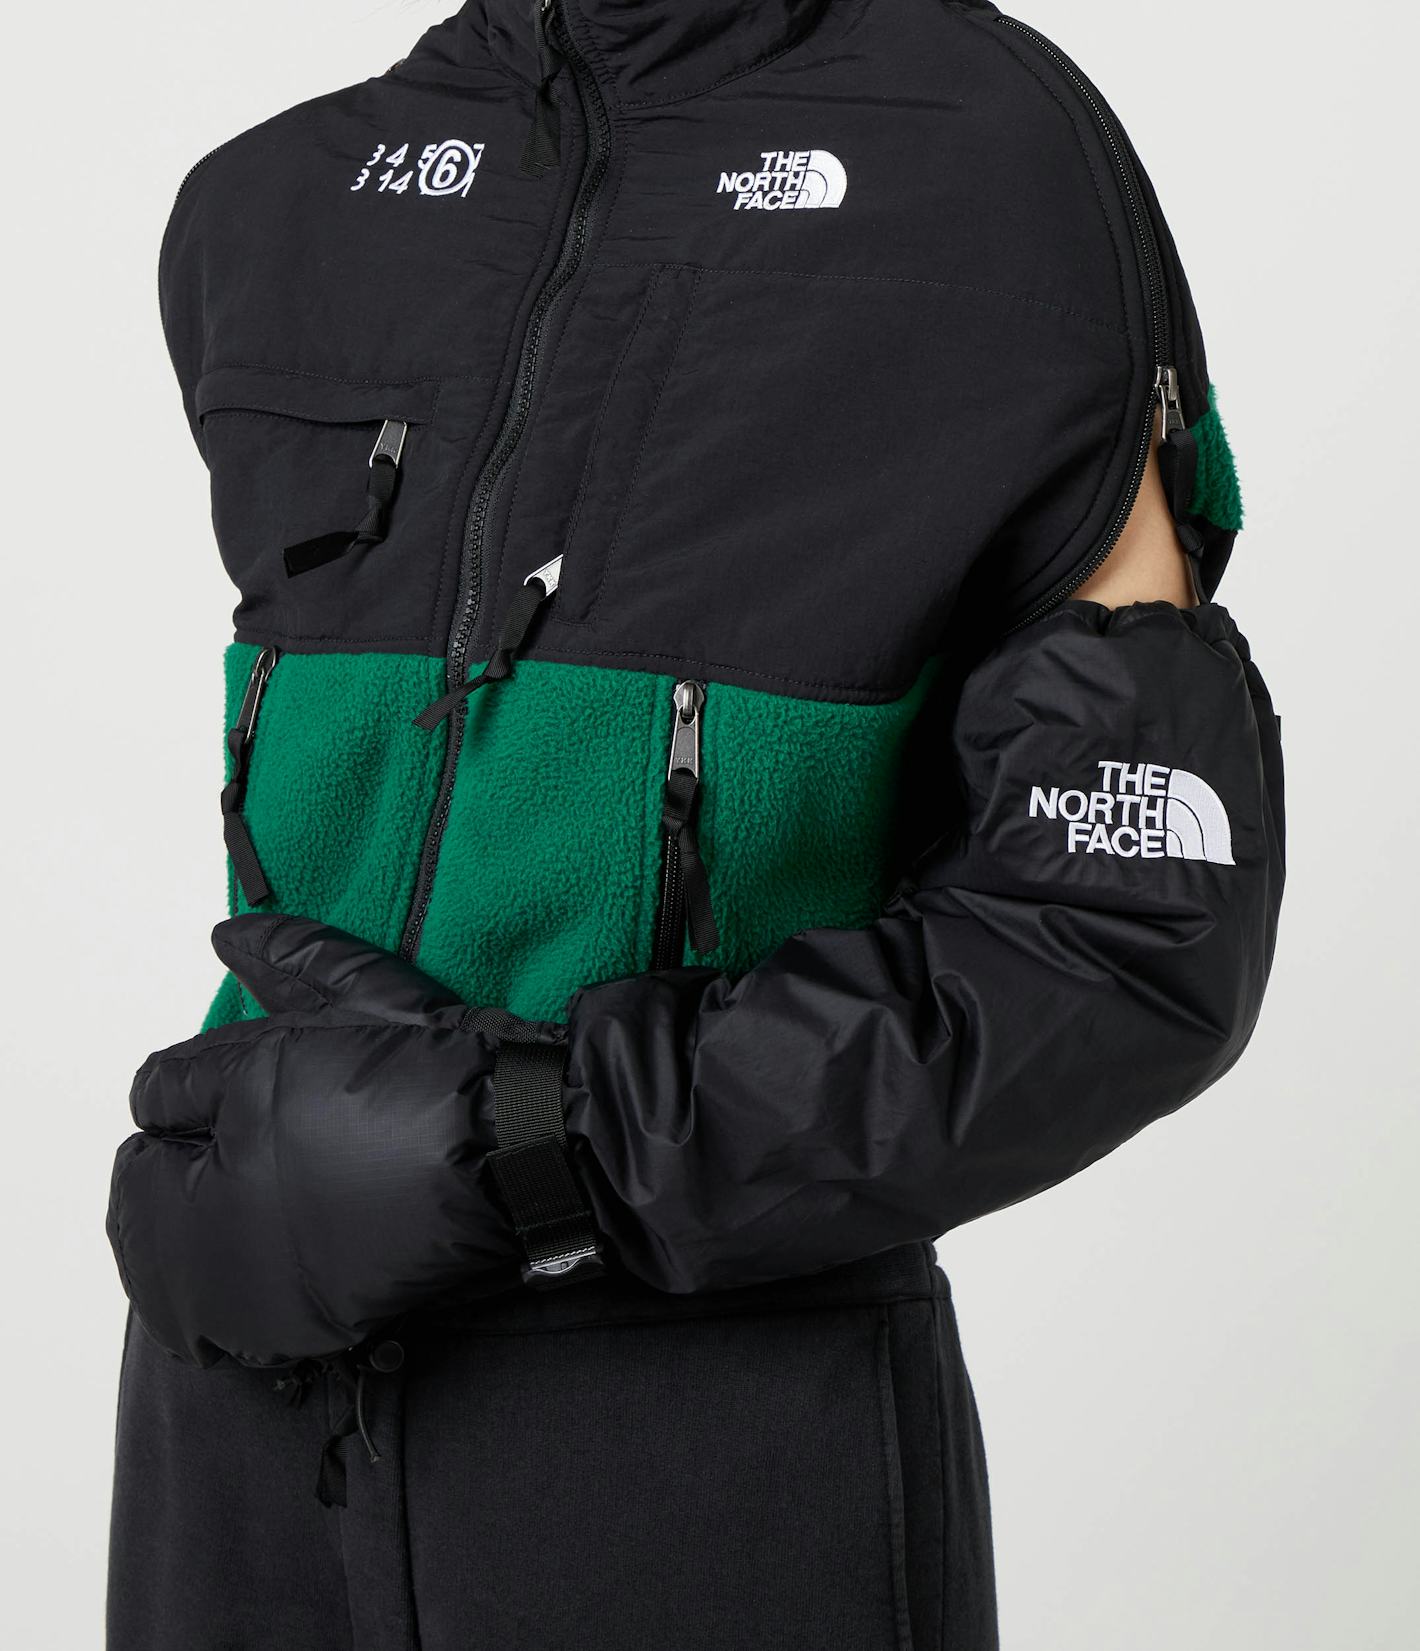 The North Face and MM6 Maison Margiela's outrageous outdoor gear ...